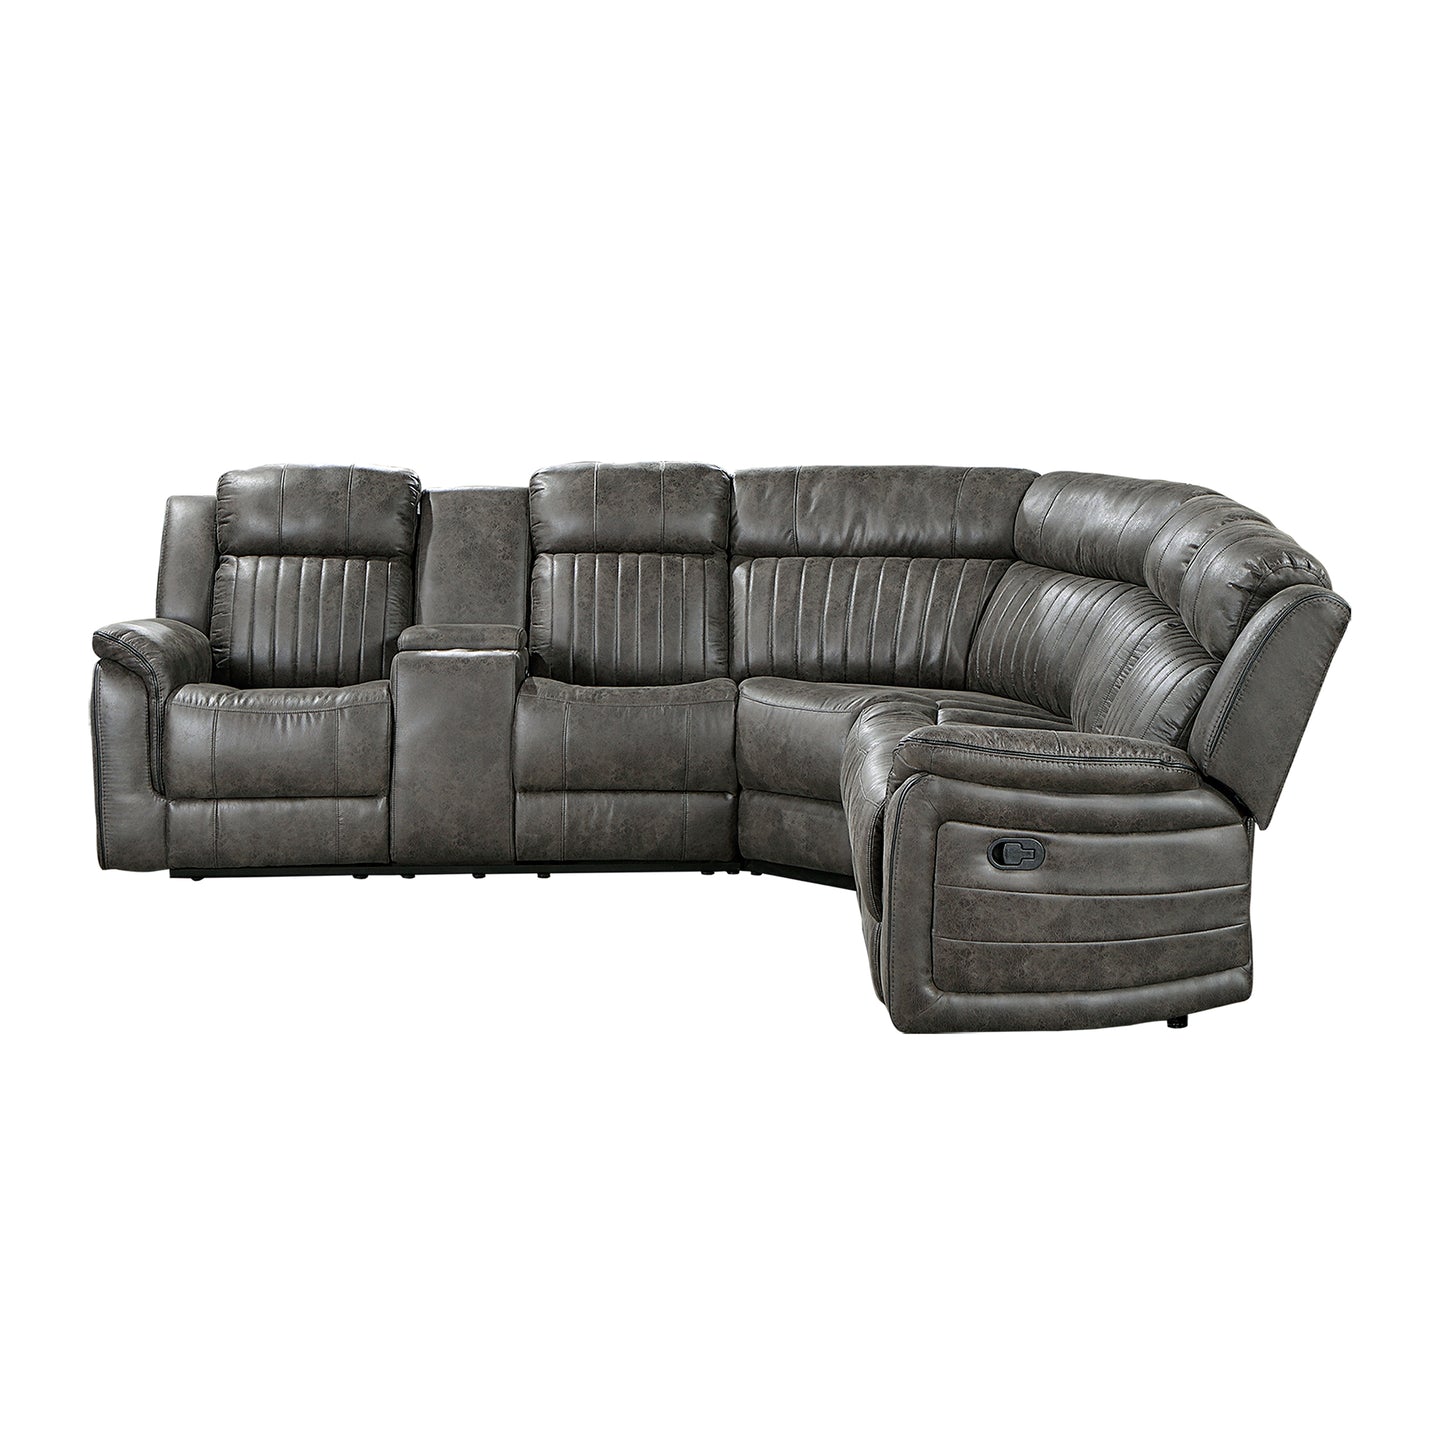 Centeroak 3-Piece Reclining Sectional with Left Console GREY